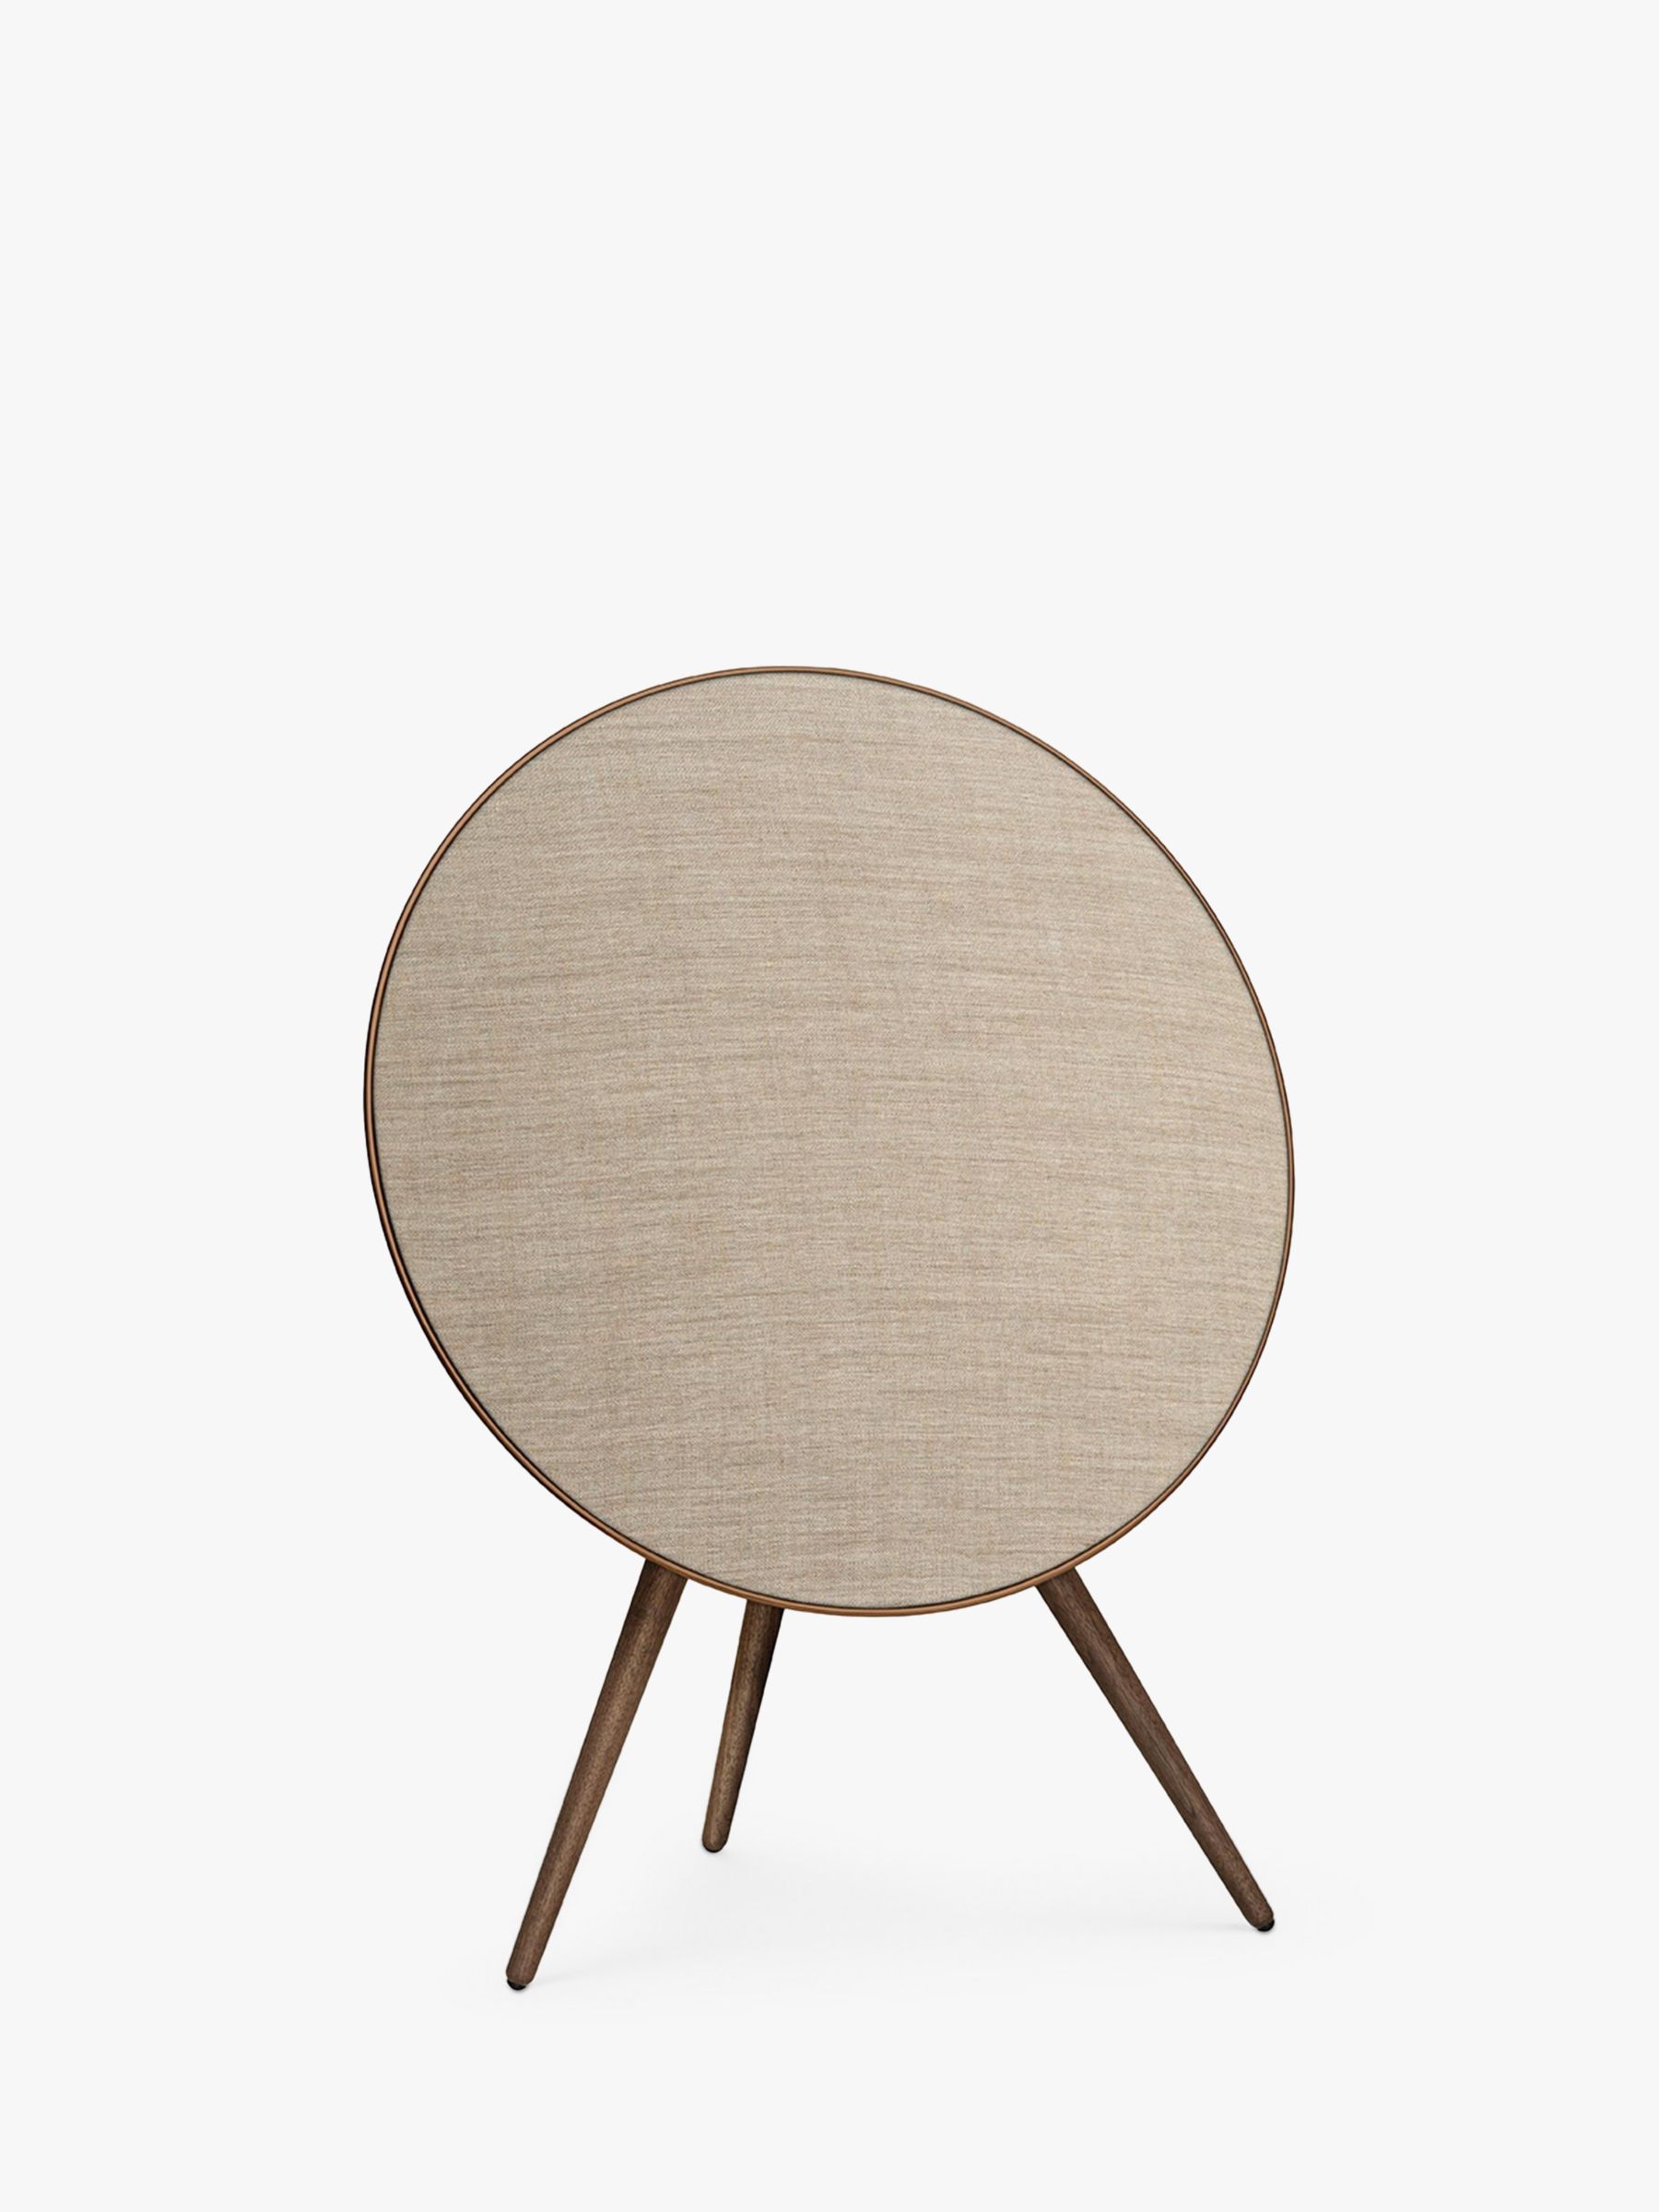 Bang & Olufsen Beoplay A9 Bluetooth, AirPlay, Google Cast & DLNA Music System